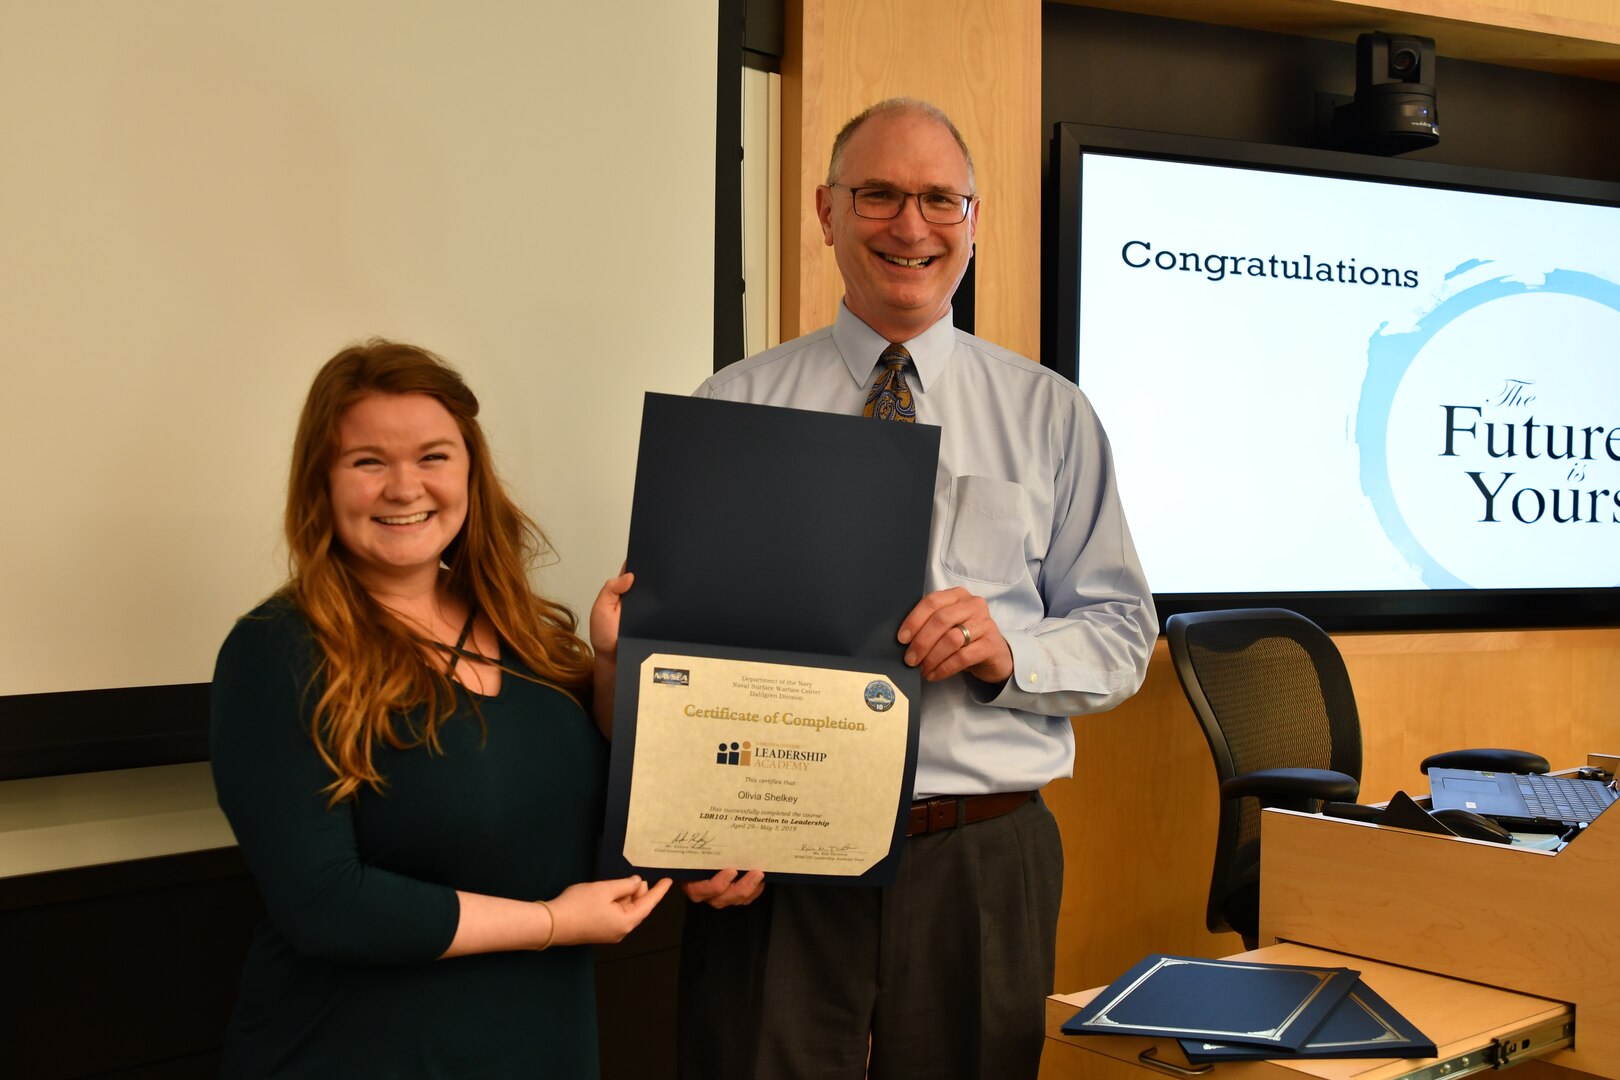 IMAGE: Gill Goddin, Naval Surface Warfare Center Dahlgren Division (NSWCDD) chief engineer, presents a certificate to a NSWCDD Leadership 101 graduate.